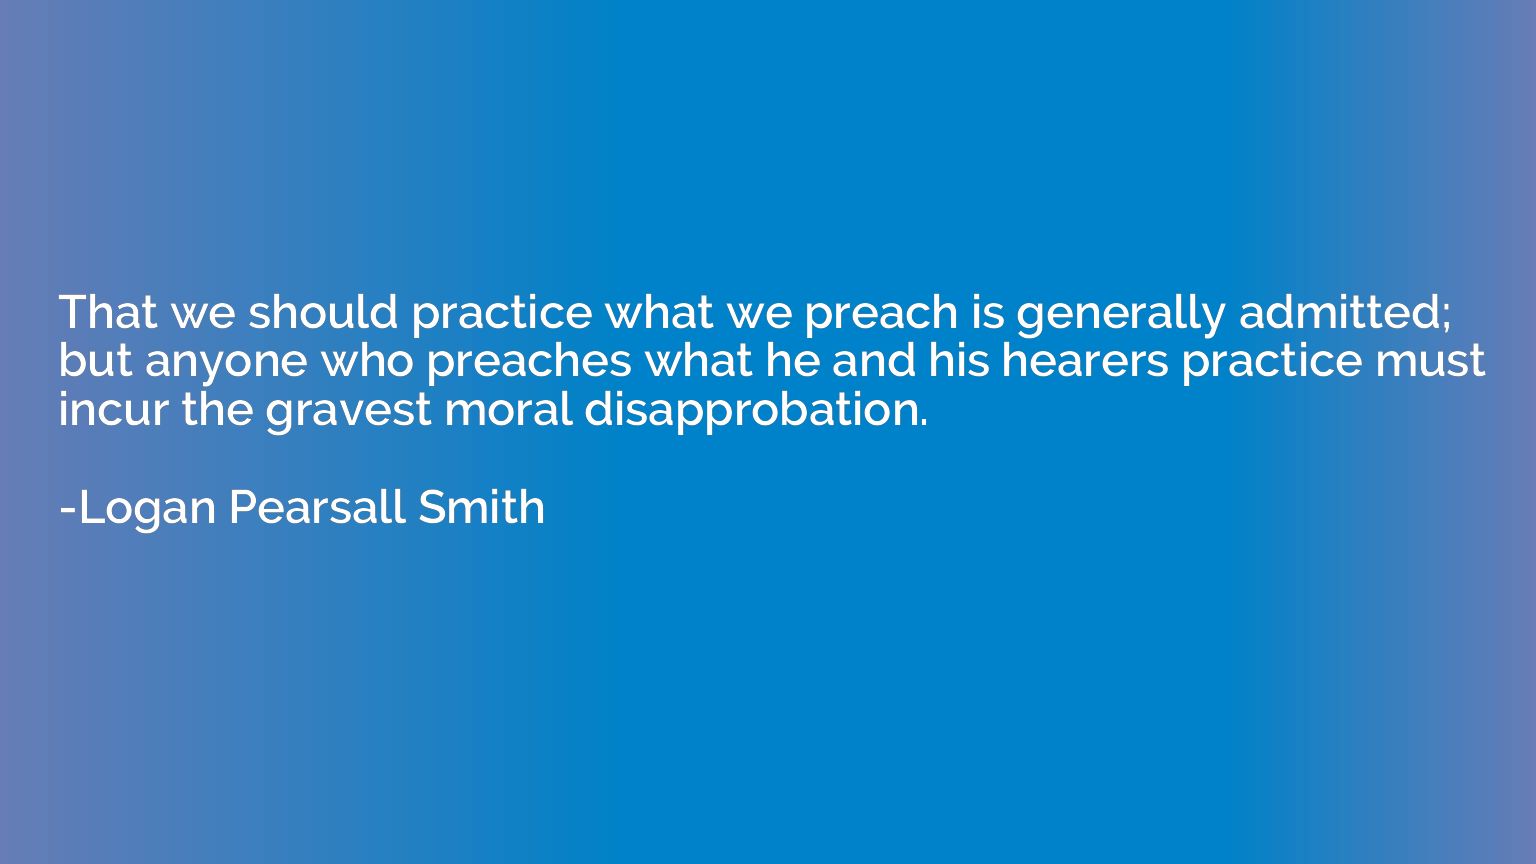 That we should practice what we preach is generally admitted